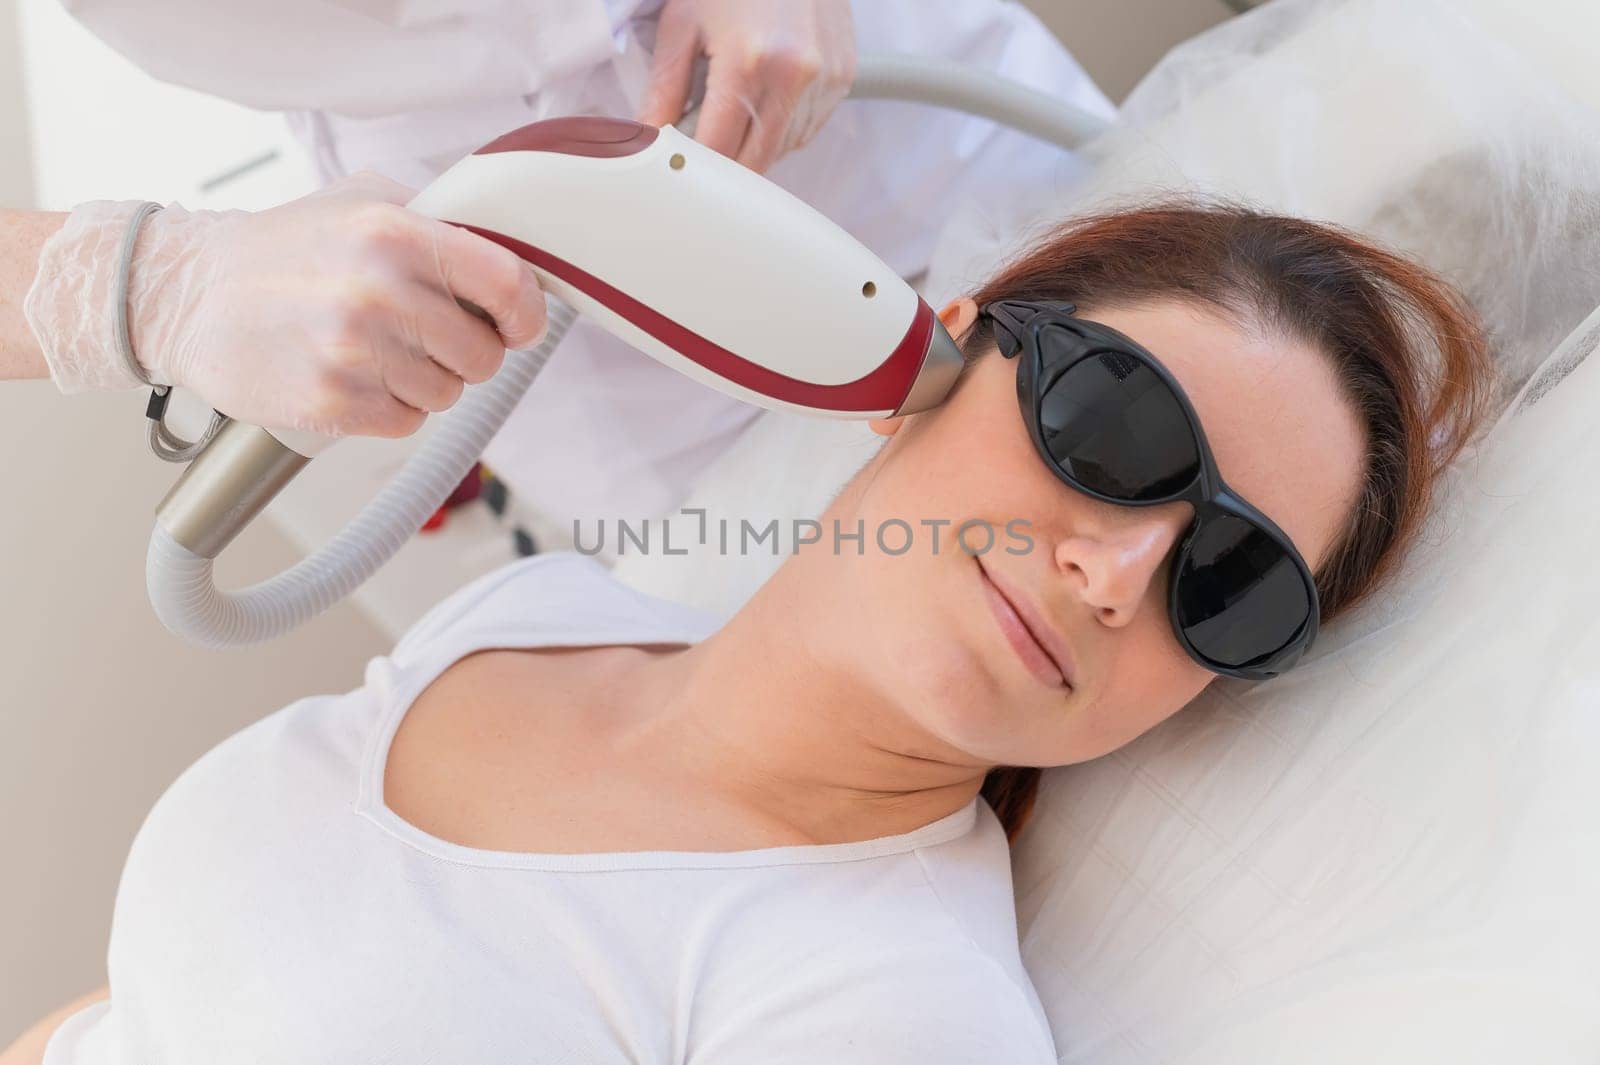 The doctor makes laser hair removal on the face of a woman in the salon. An alternative way to permanently remove unwanted hair by mrwed54